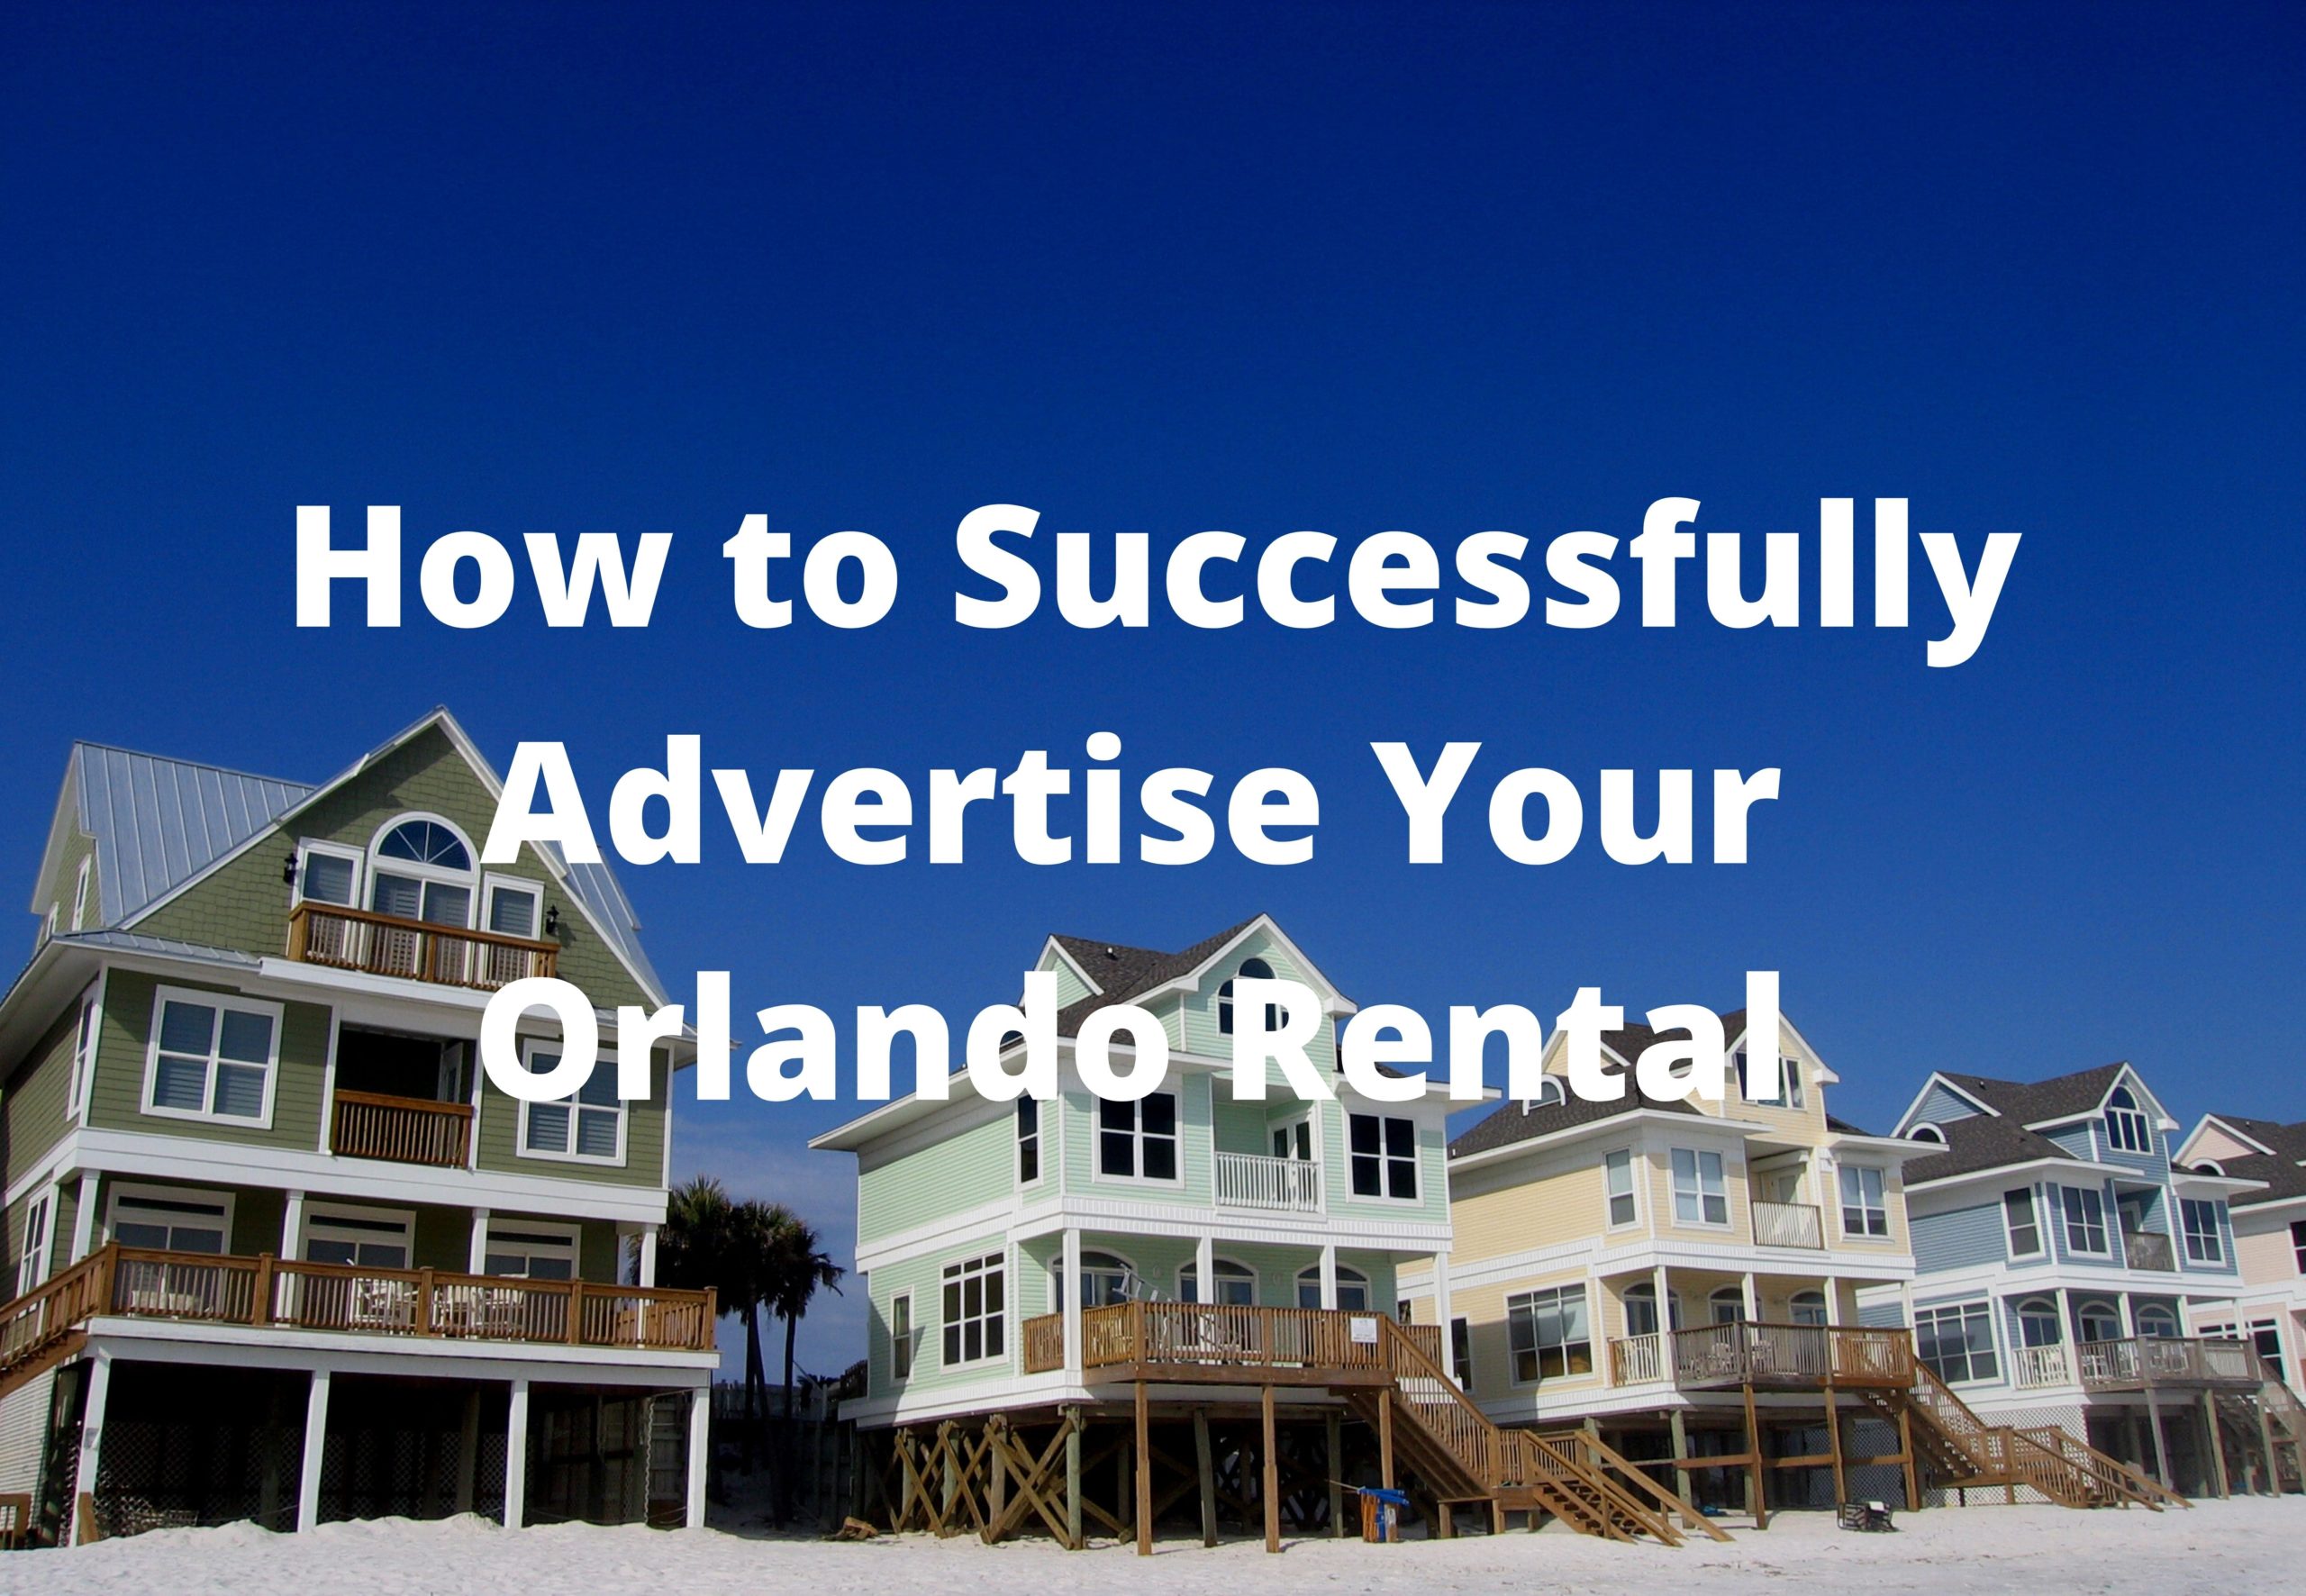 How to Successfully Advertise Your Orlando Rental